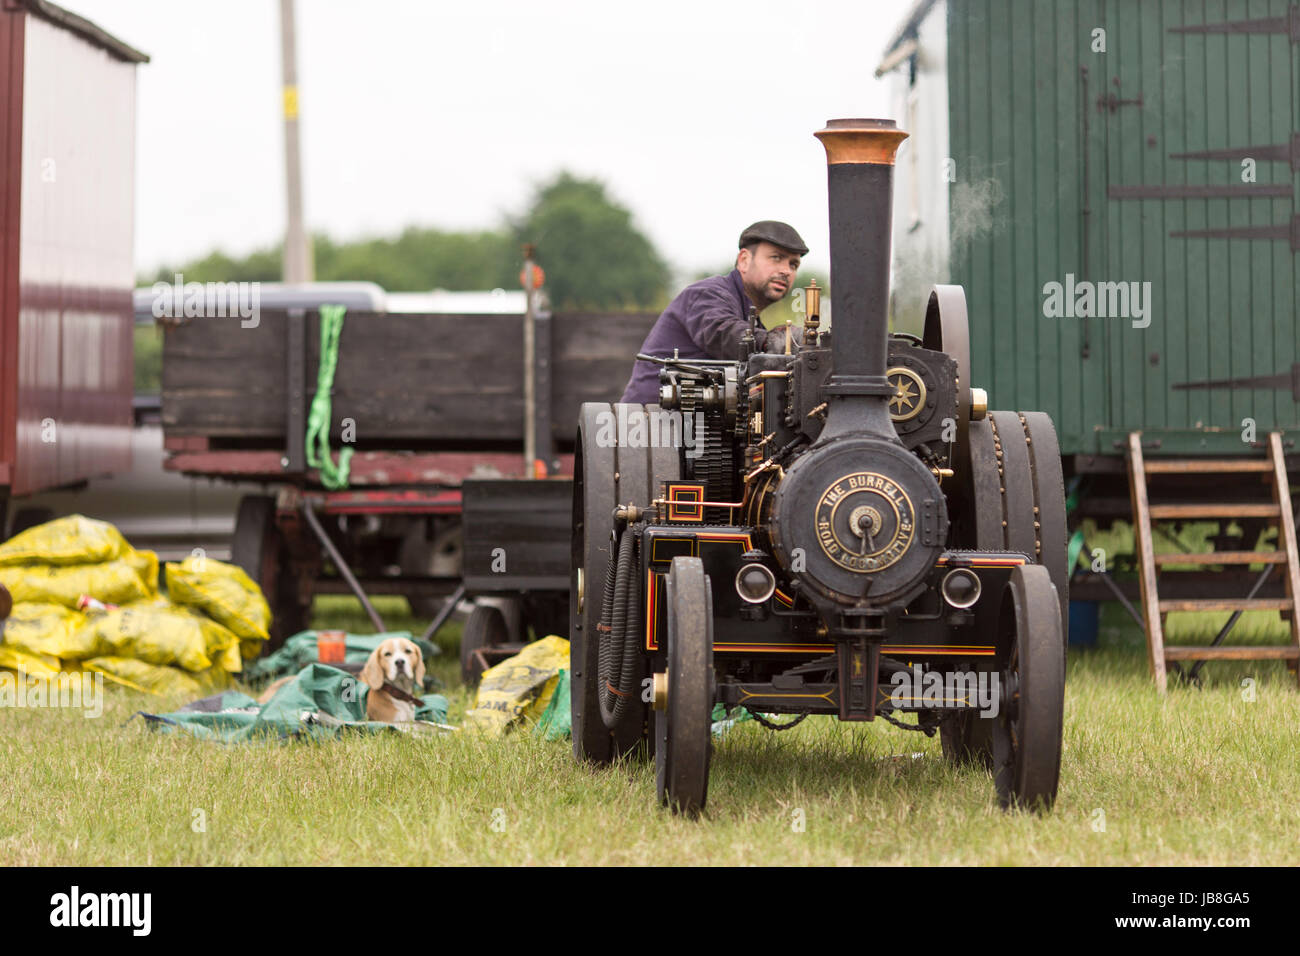 Ashley Hall Traction Engine Rally today (Monday 29th May 2017). The rally , hosted at Ashley Hall for the third year running , Stock Photo